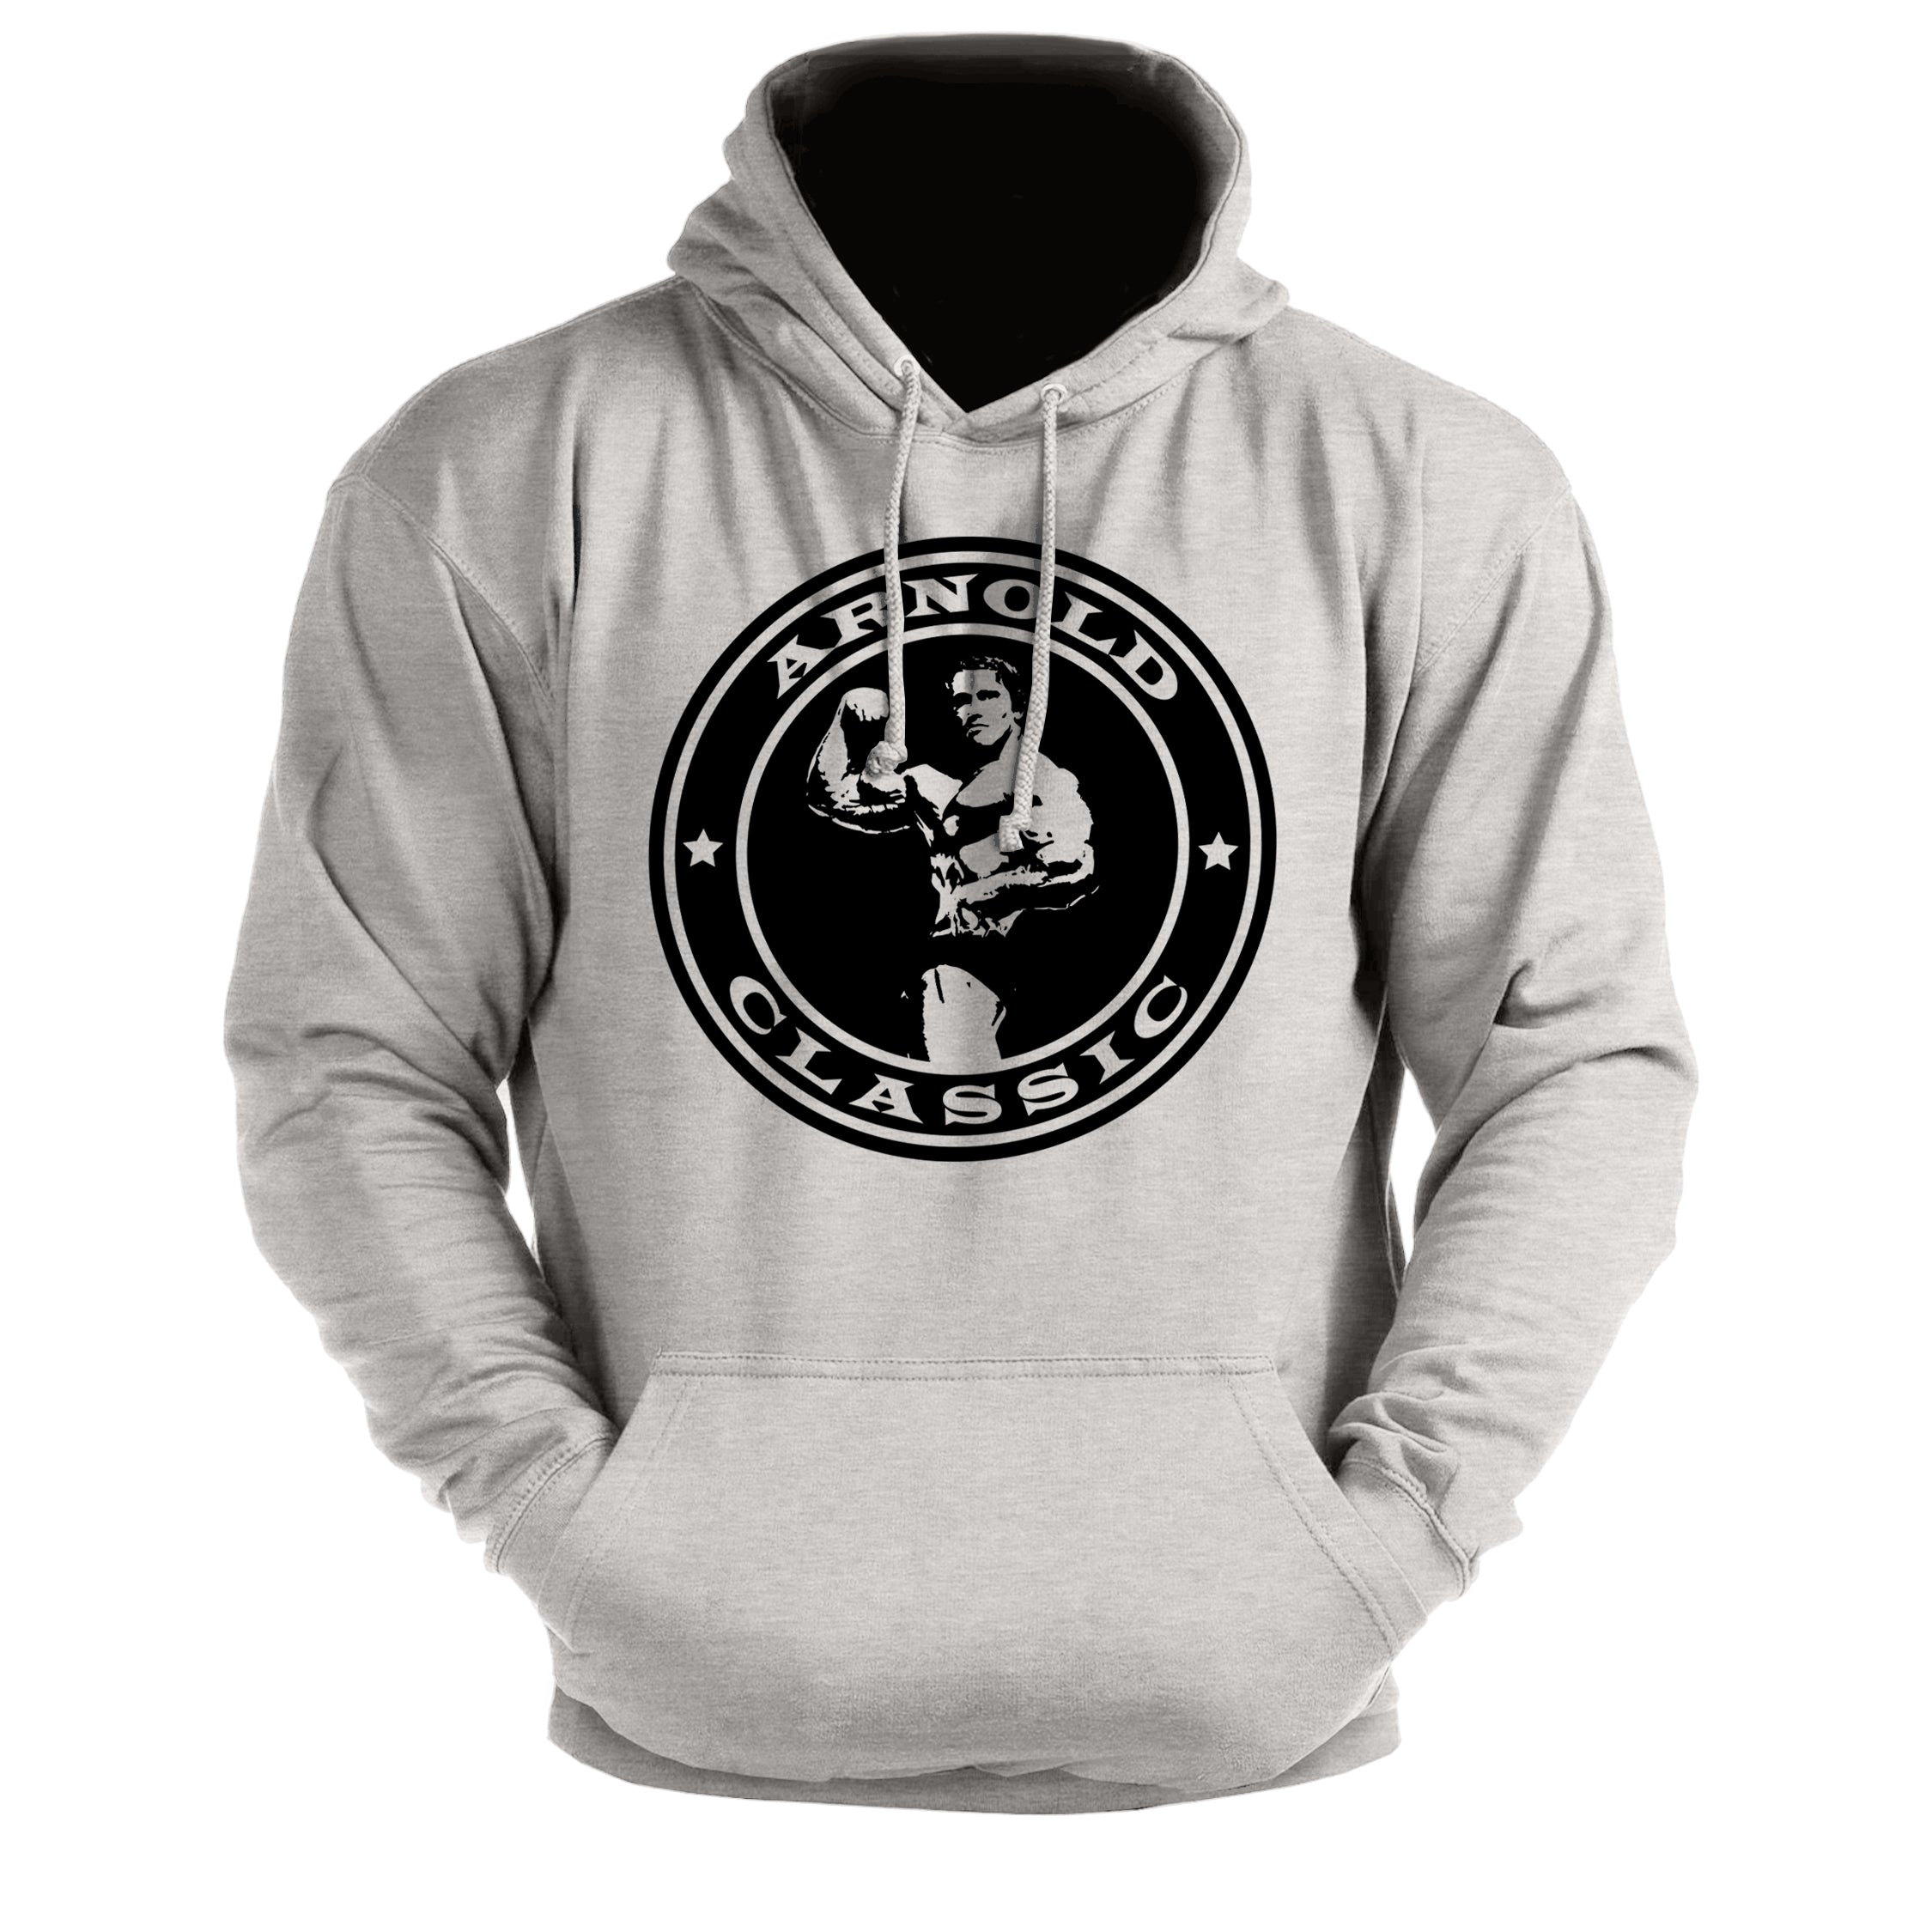 Arnold Classic - Gym Hoodie